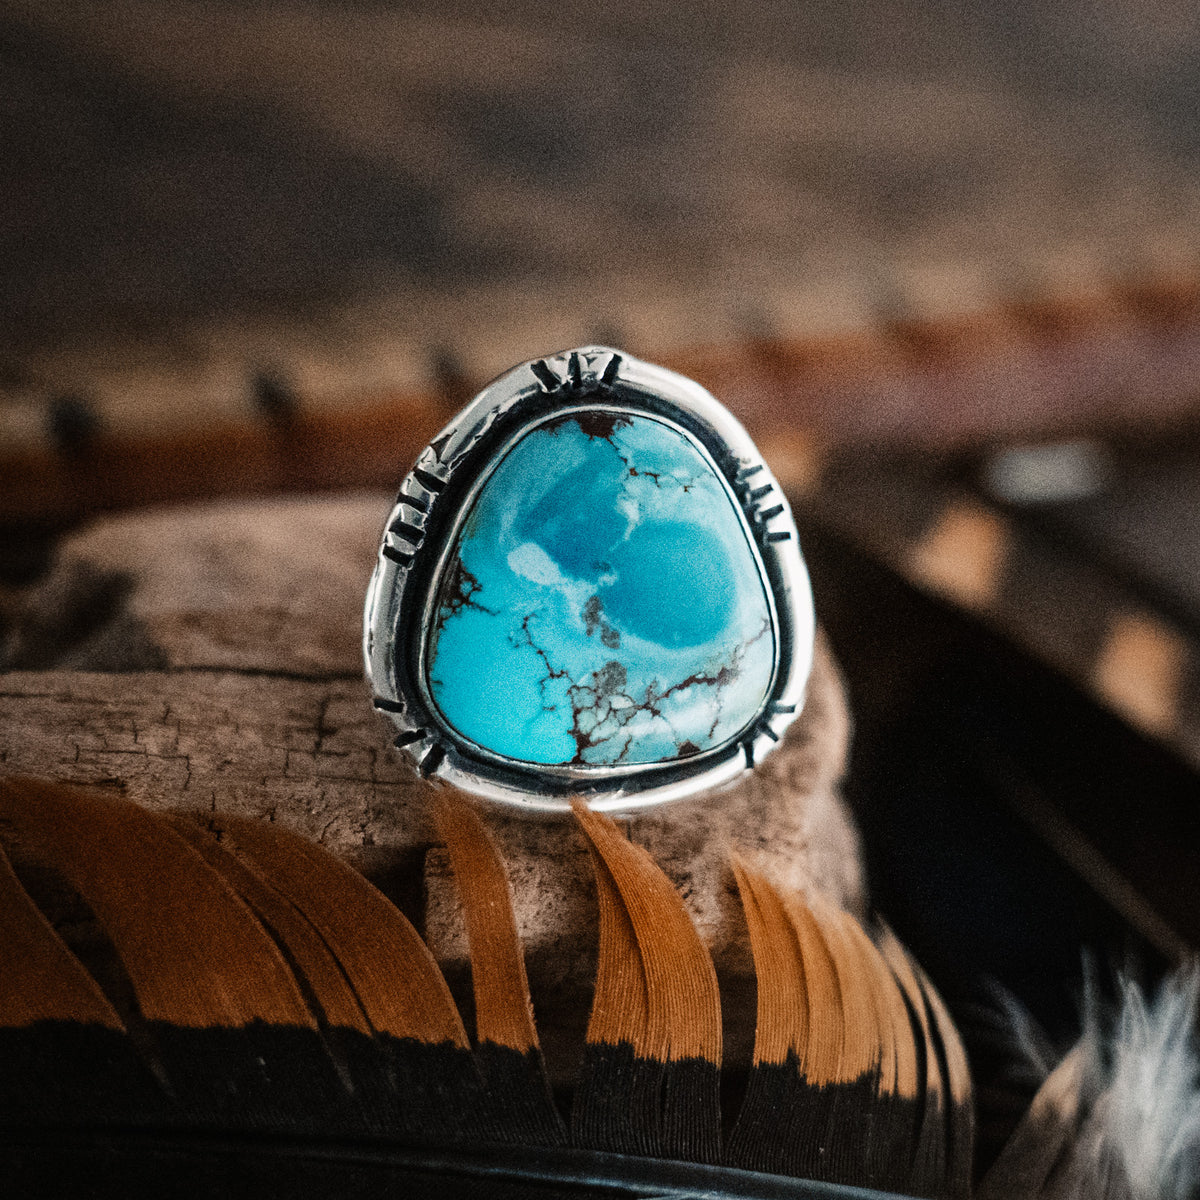 Ocean Oasis Bao Canyon Turquoise Ring - Size 6.5